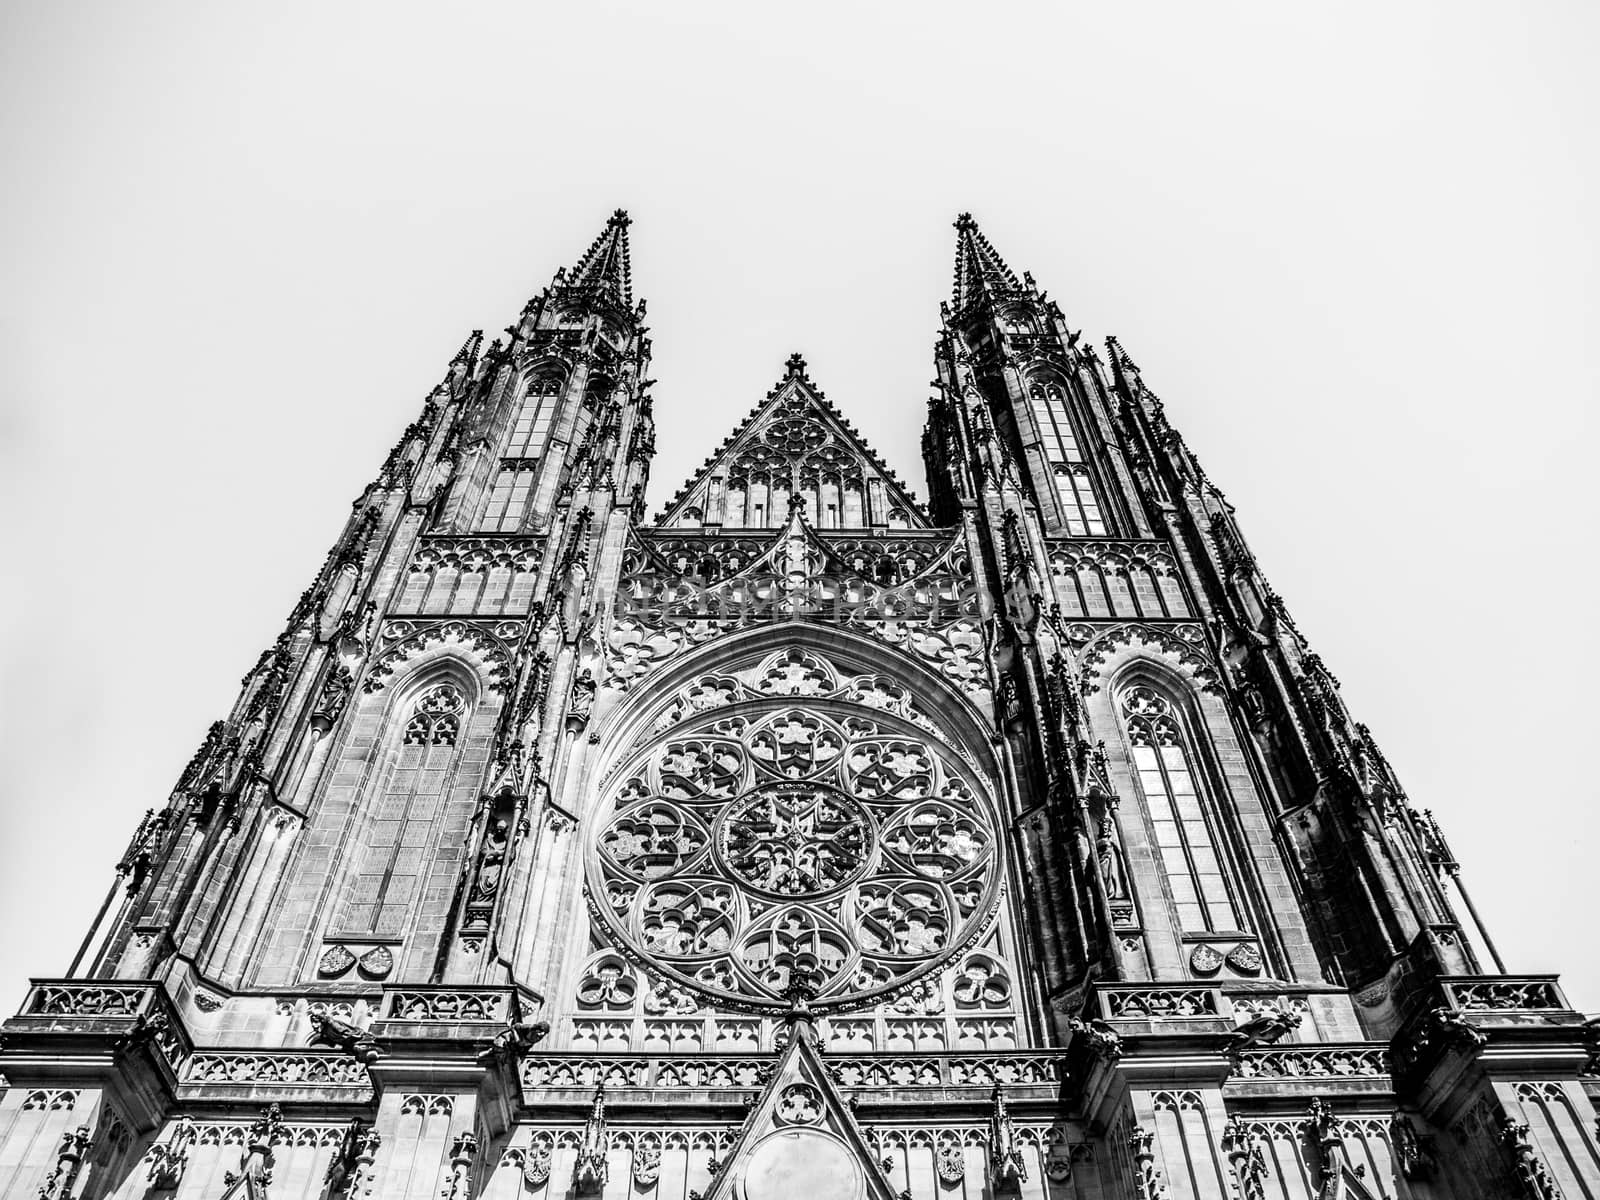 Front view of St. Vitus cathedral in Prague Castle, Prague, Czech Republic. Black and white image.